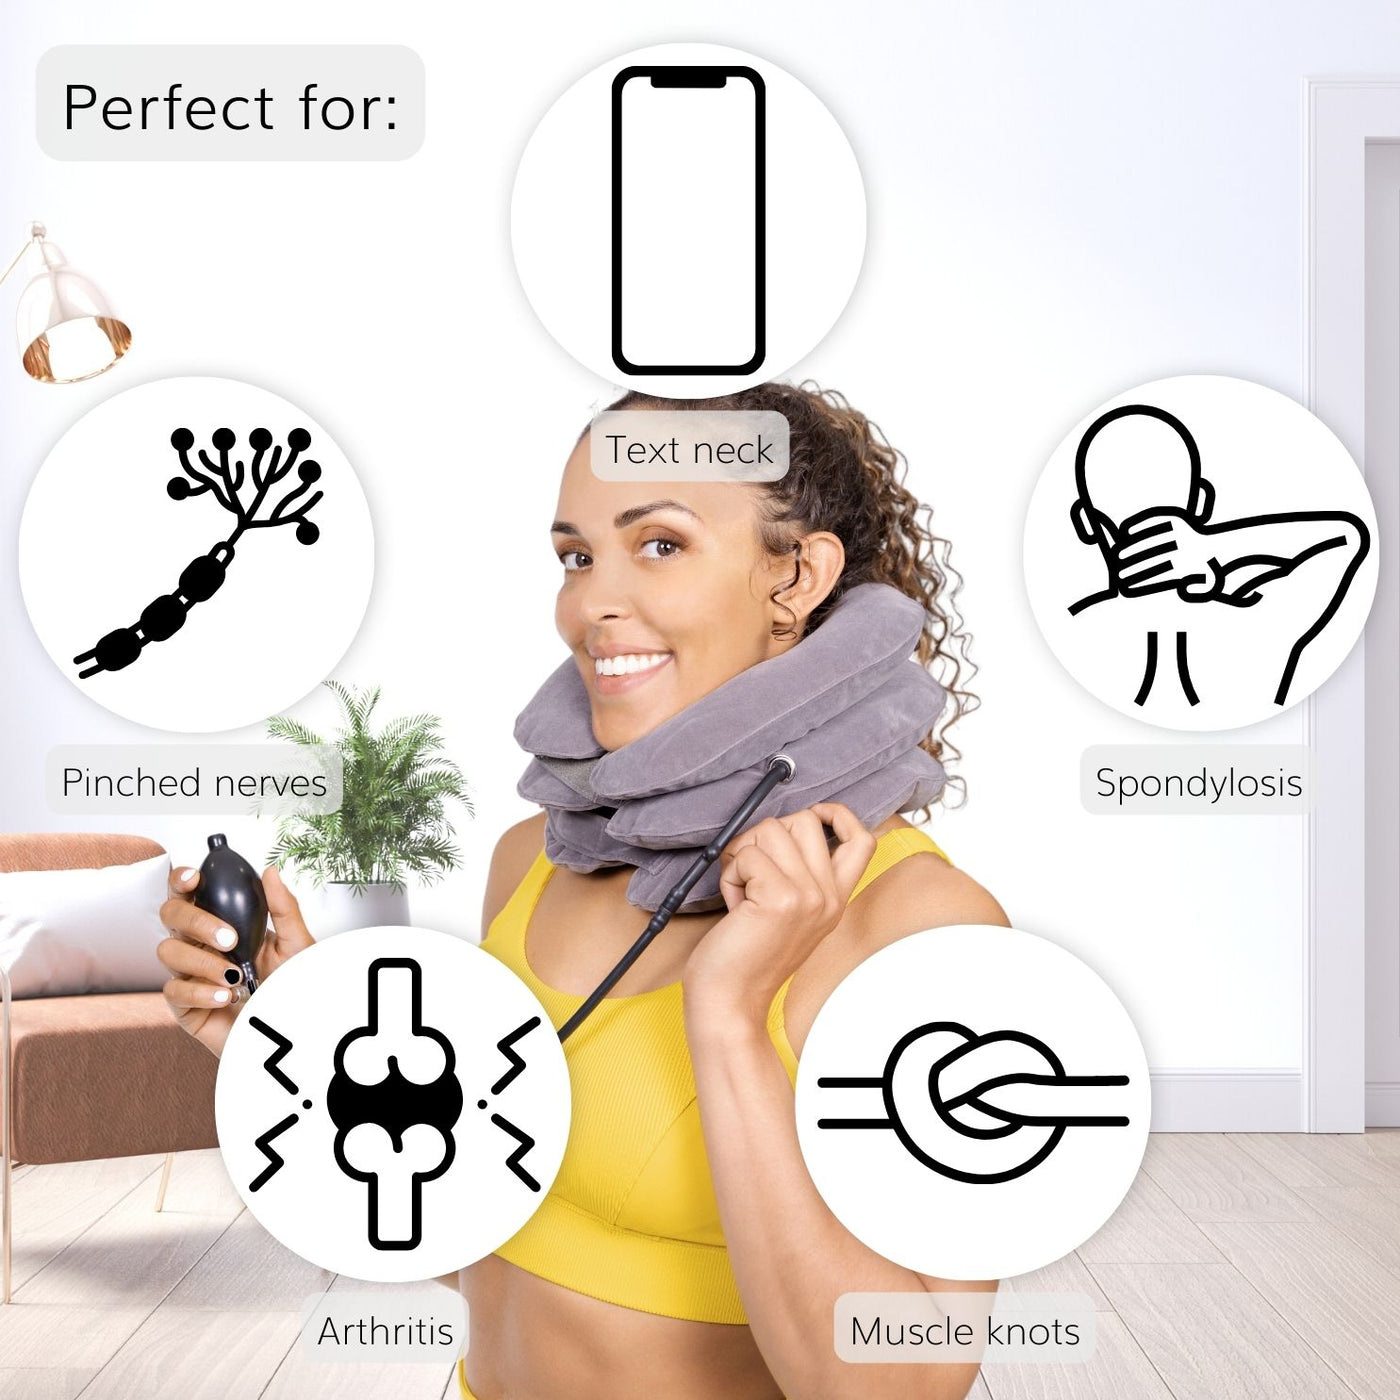 Our neck stretching device is perfect for text neck, pinched nerves, and spondylosis